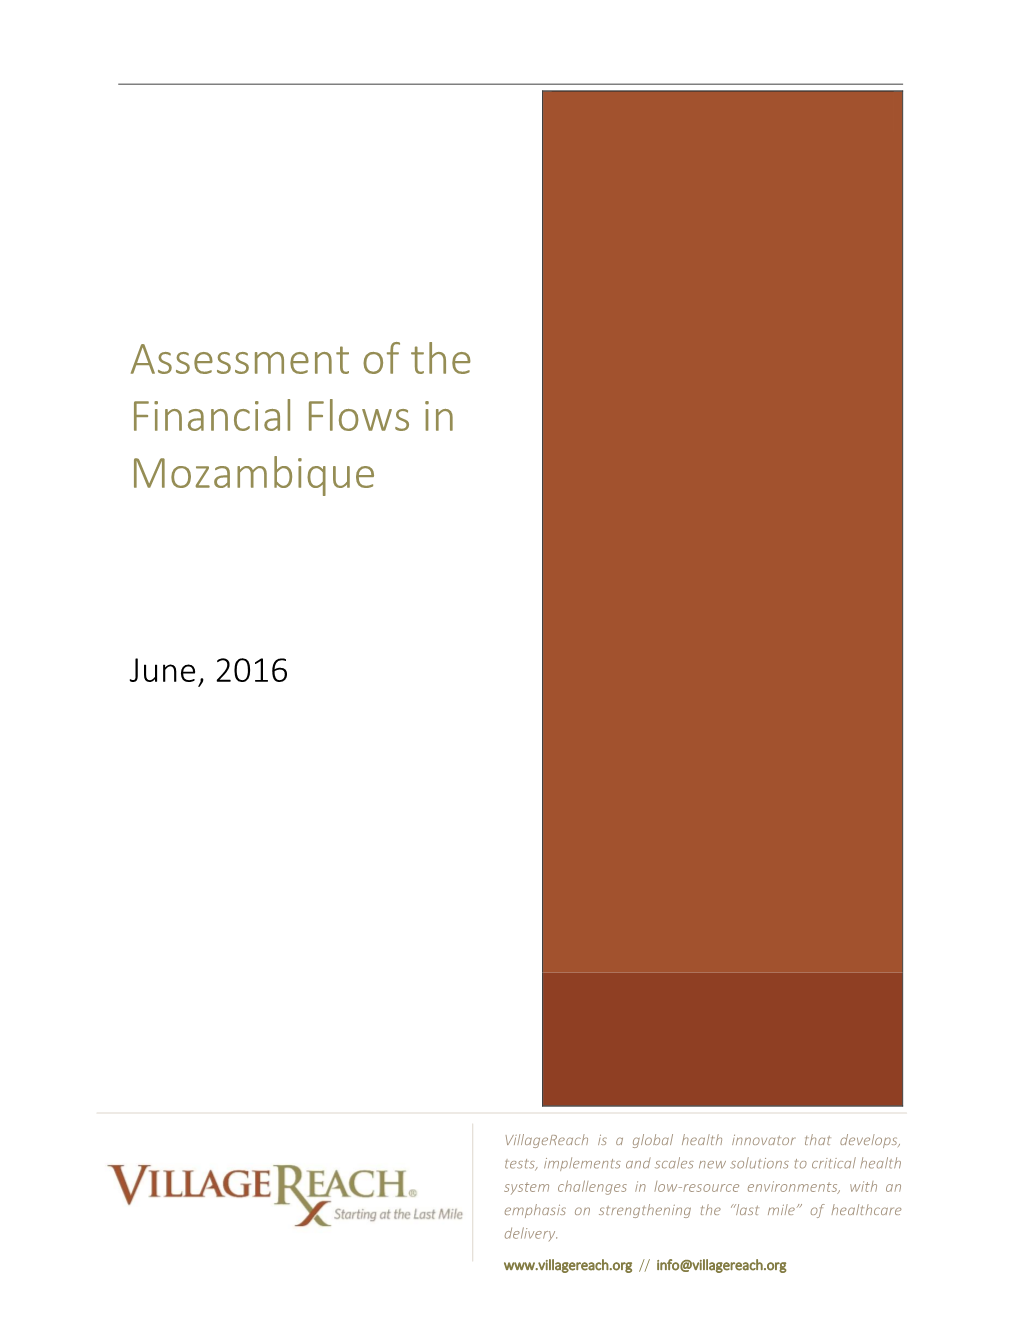 Assessment of the Financial Flows in Mozambique